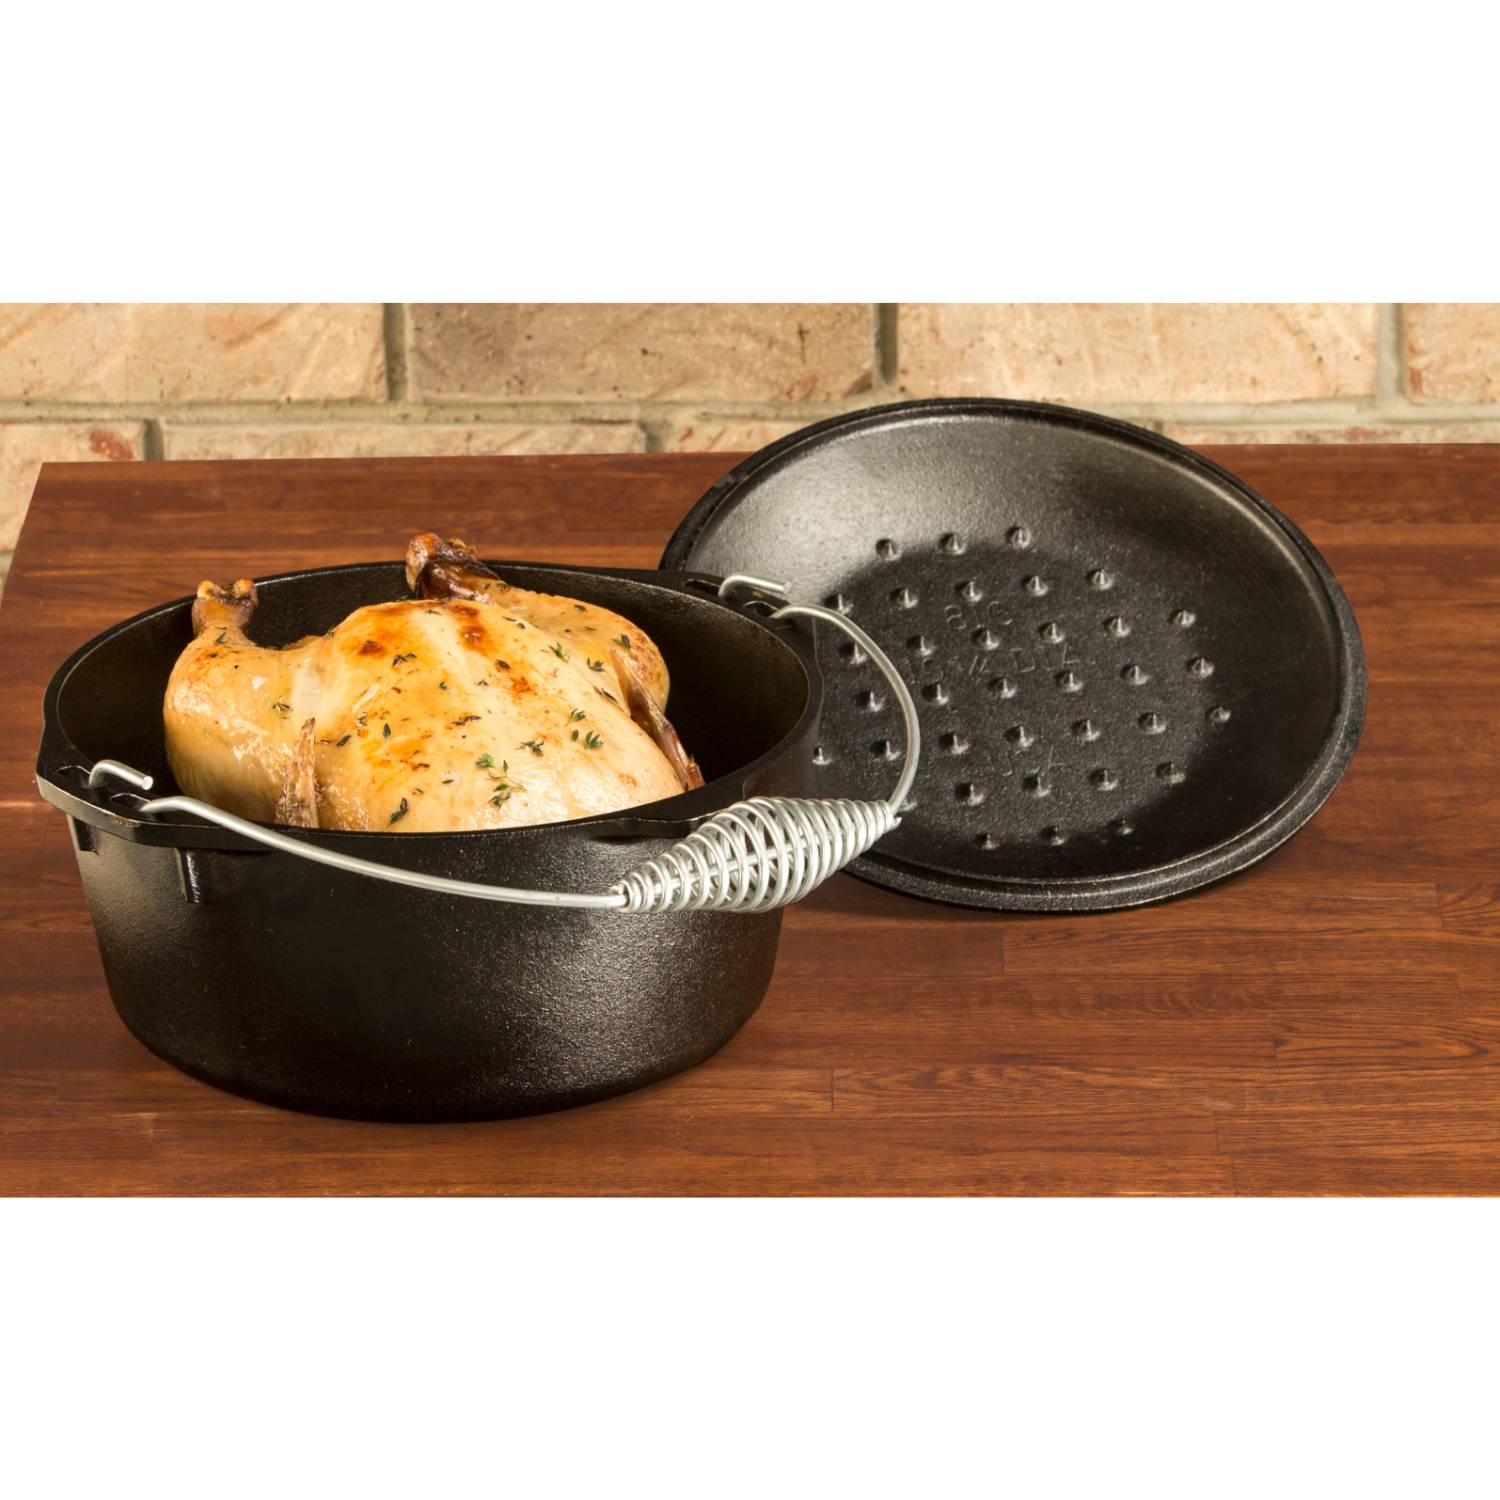 What Size Dutch Oven Do I Need?